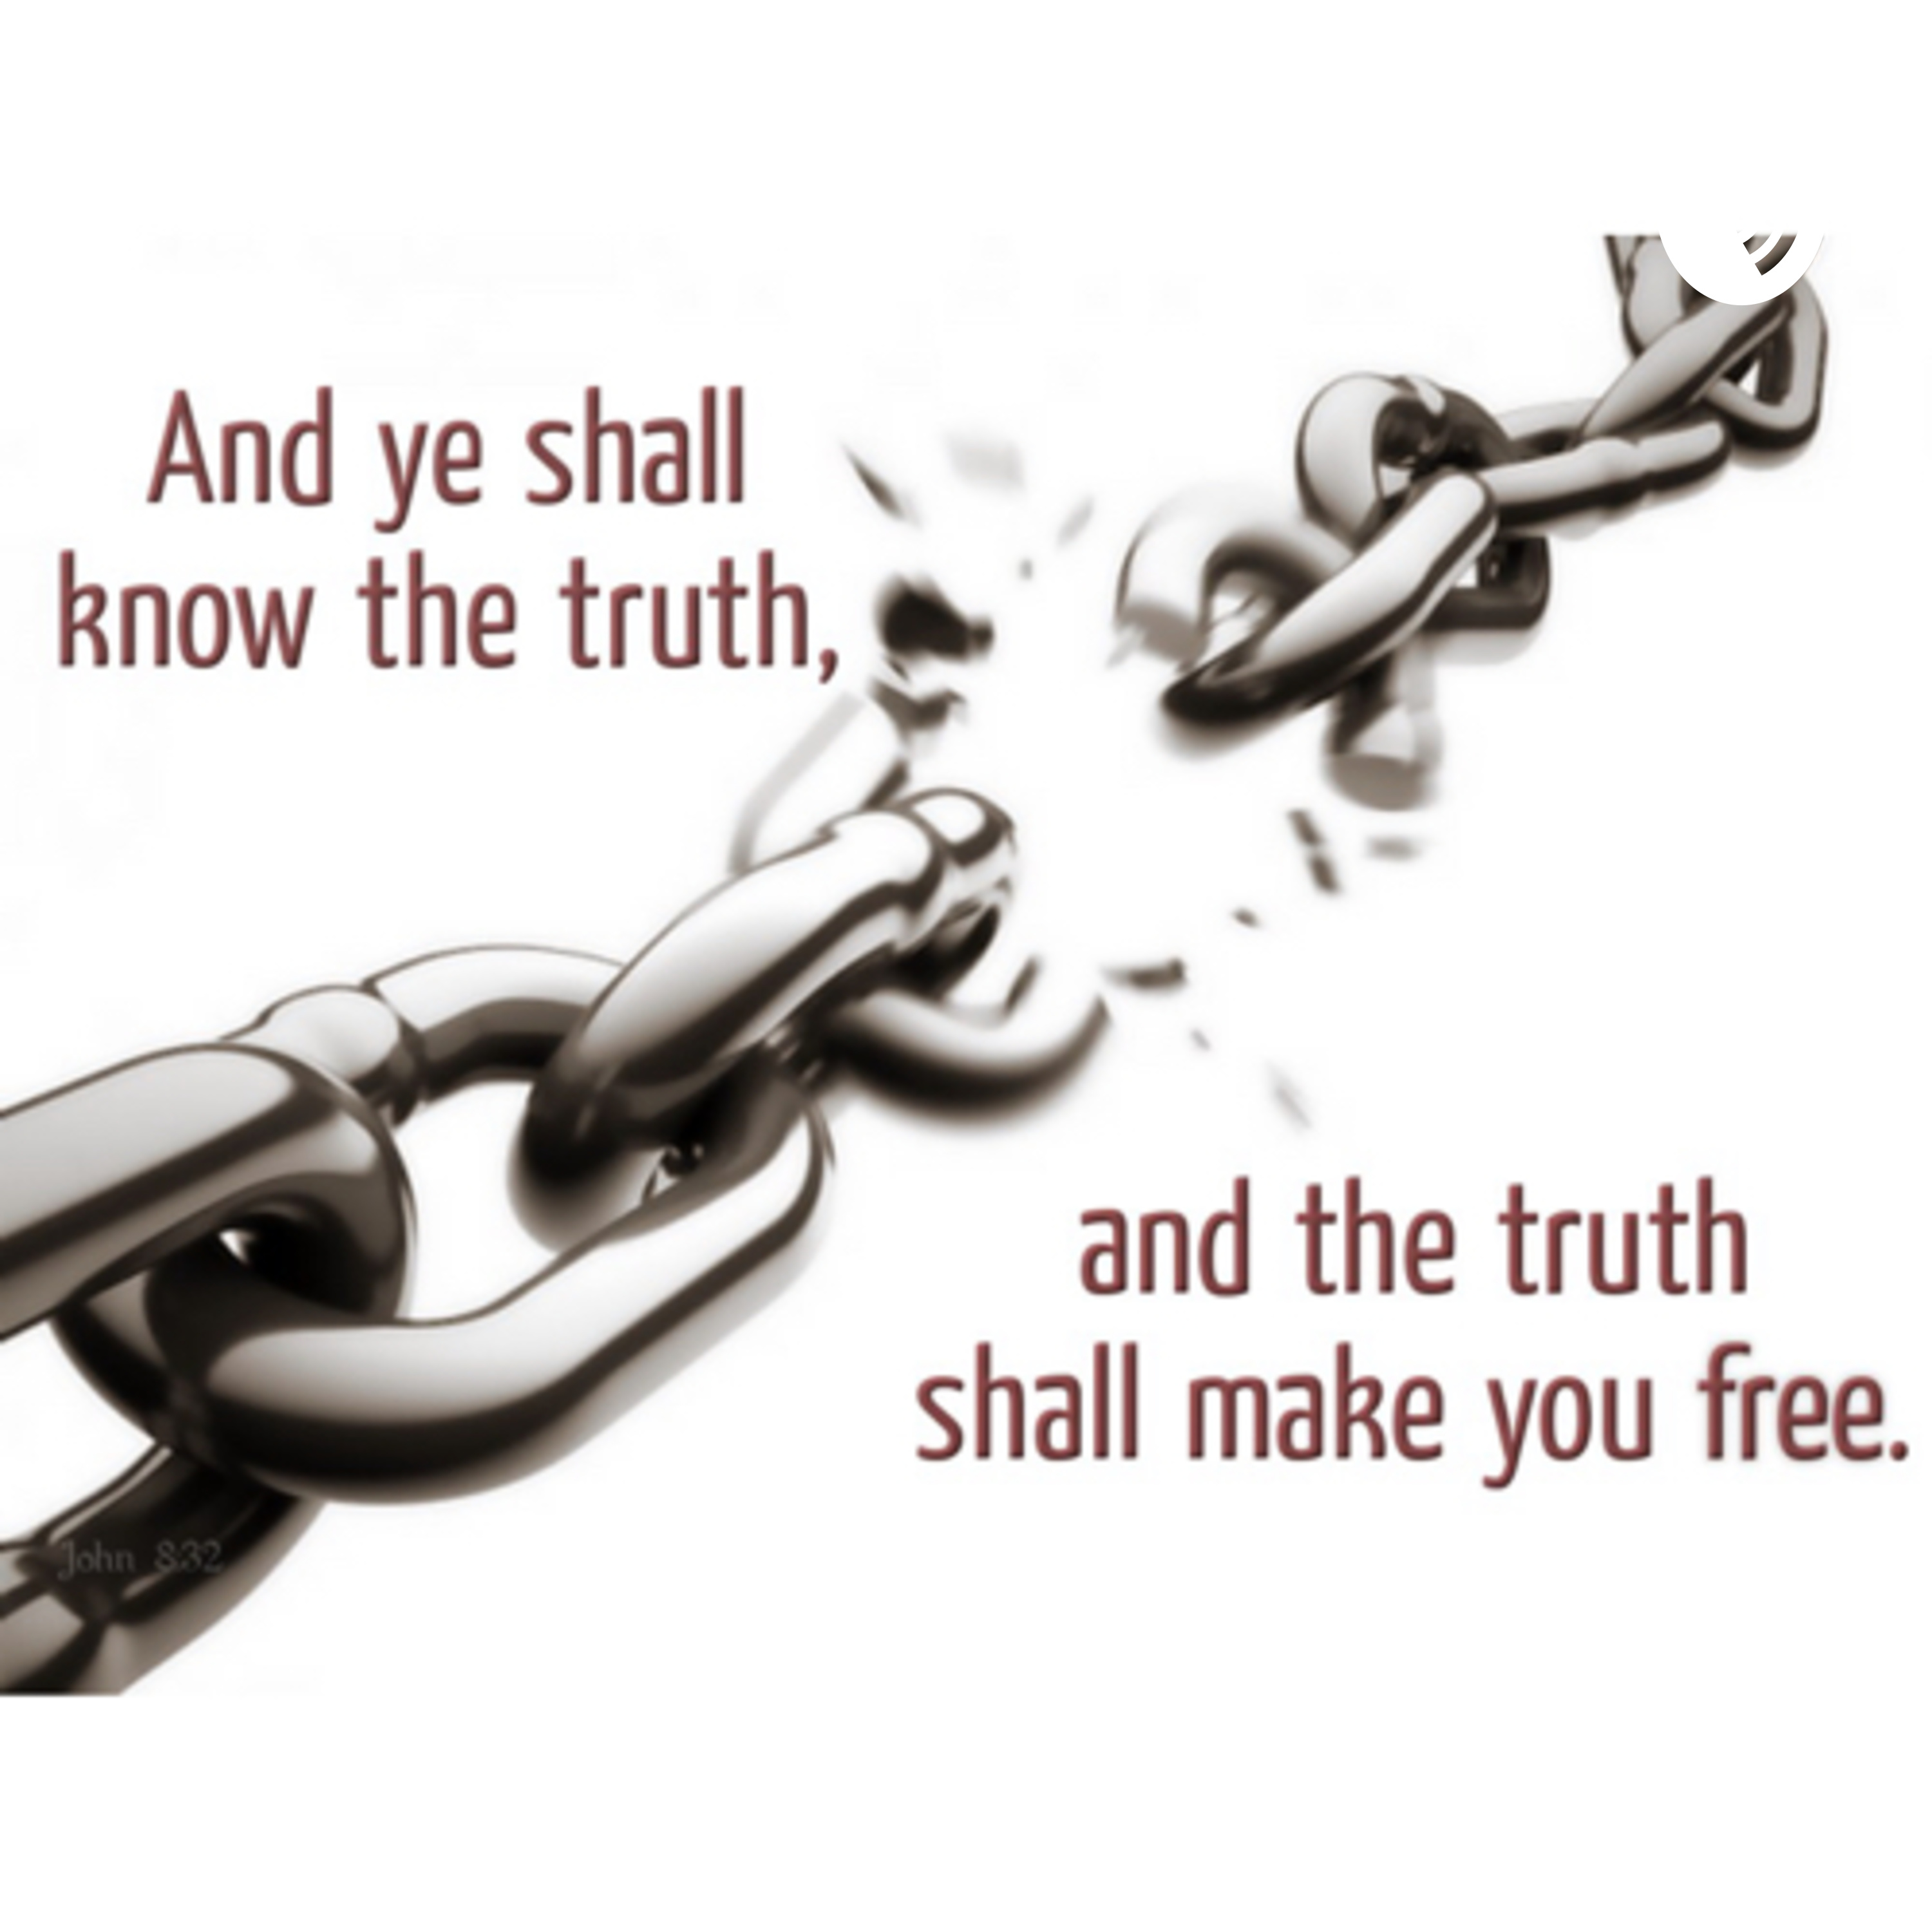 the truth will set you free essay